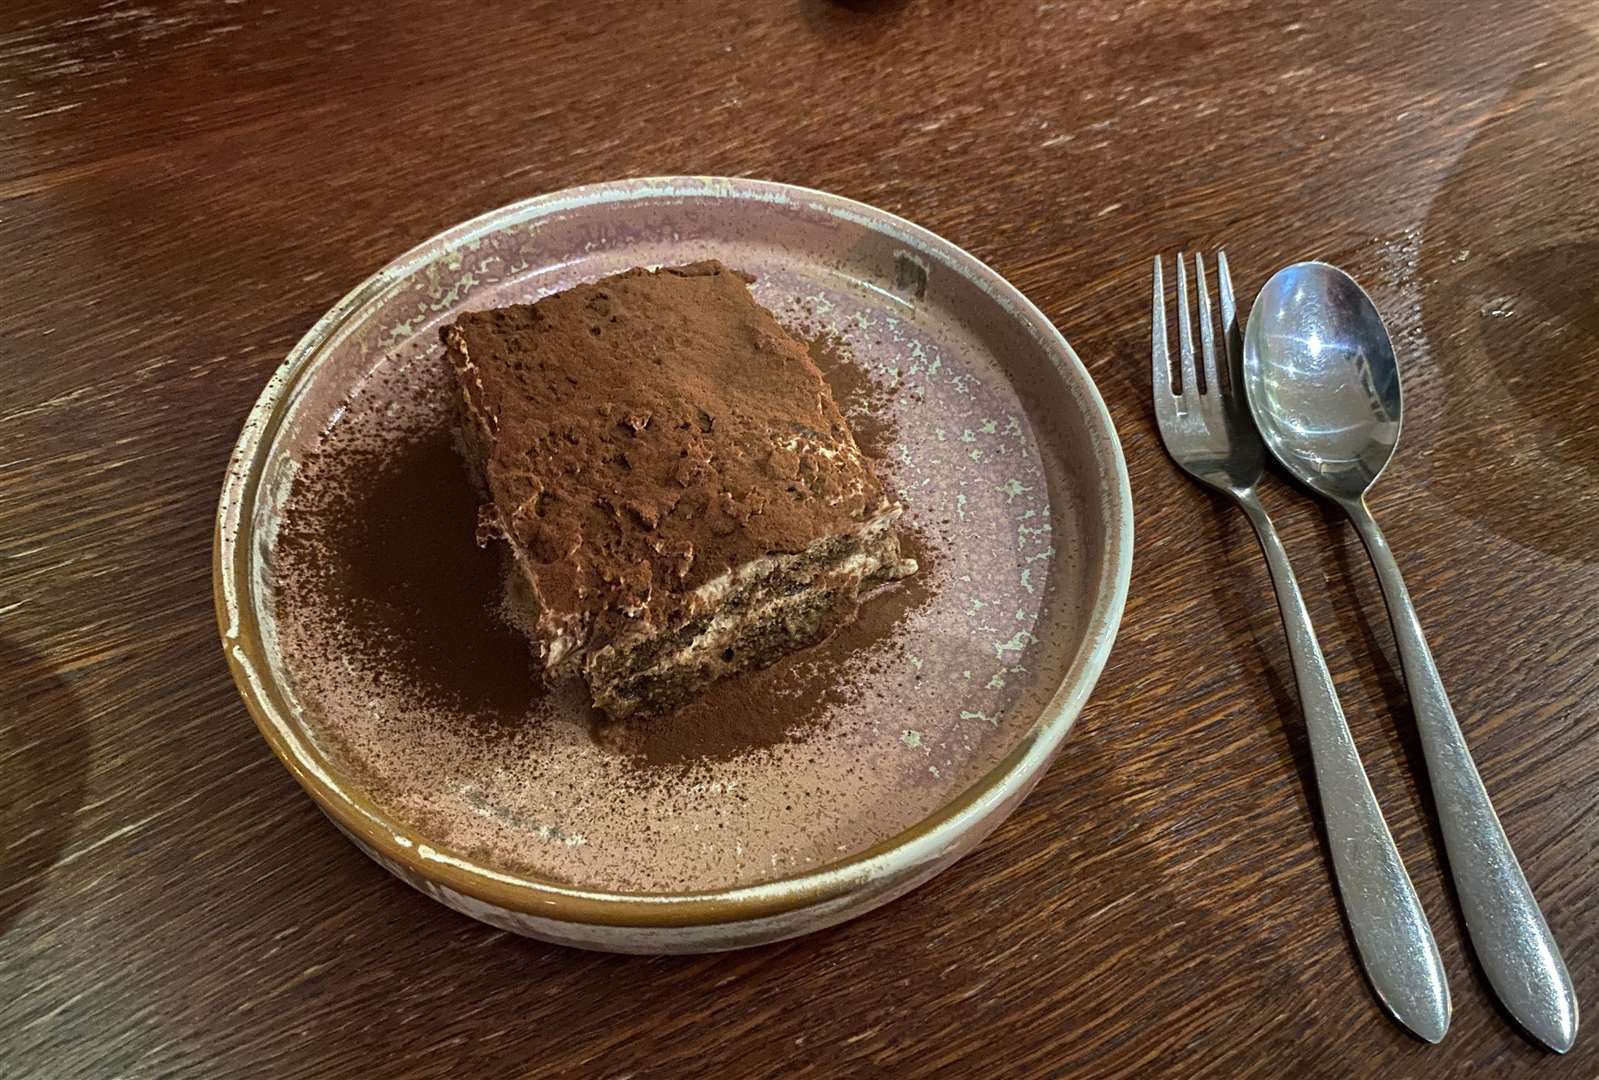 Our reporter went for the tiramisu, which was £6.50